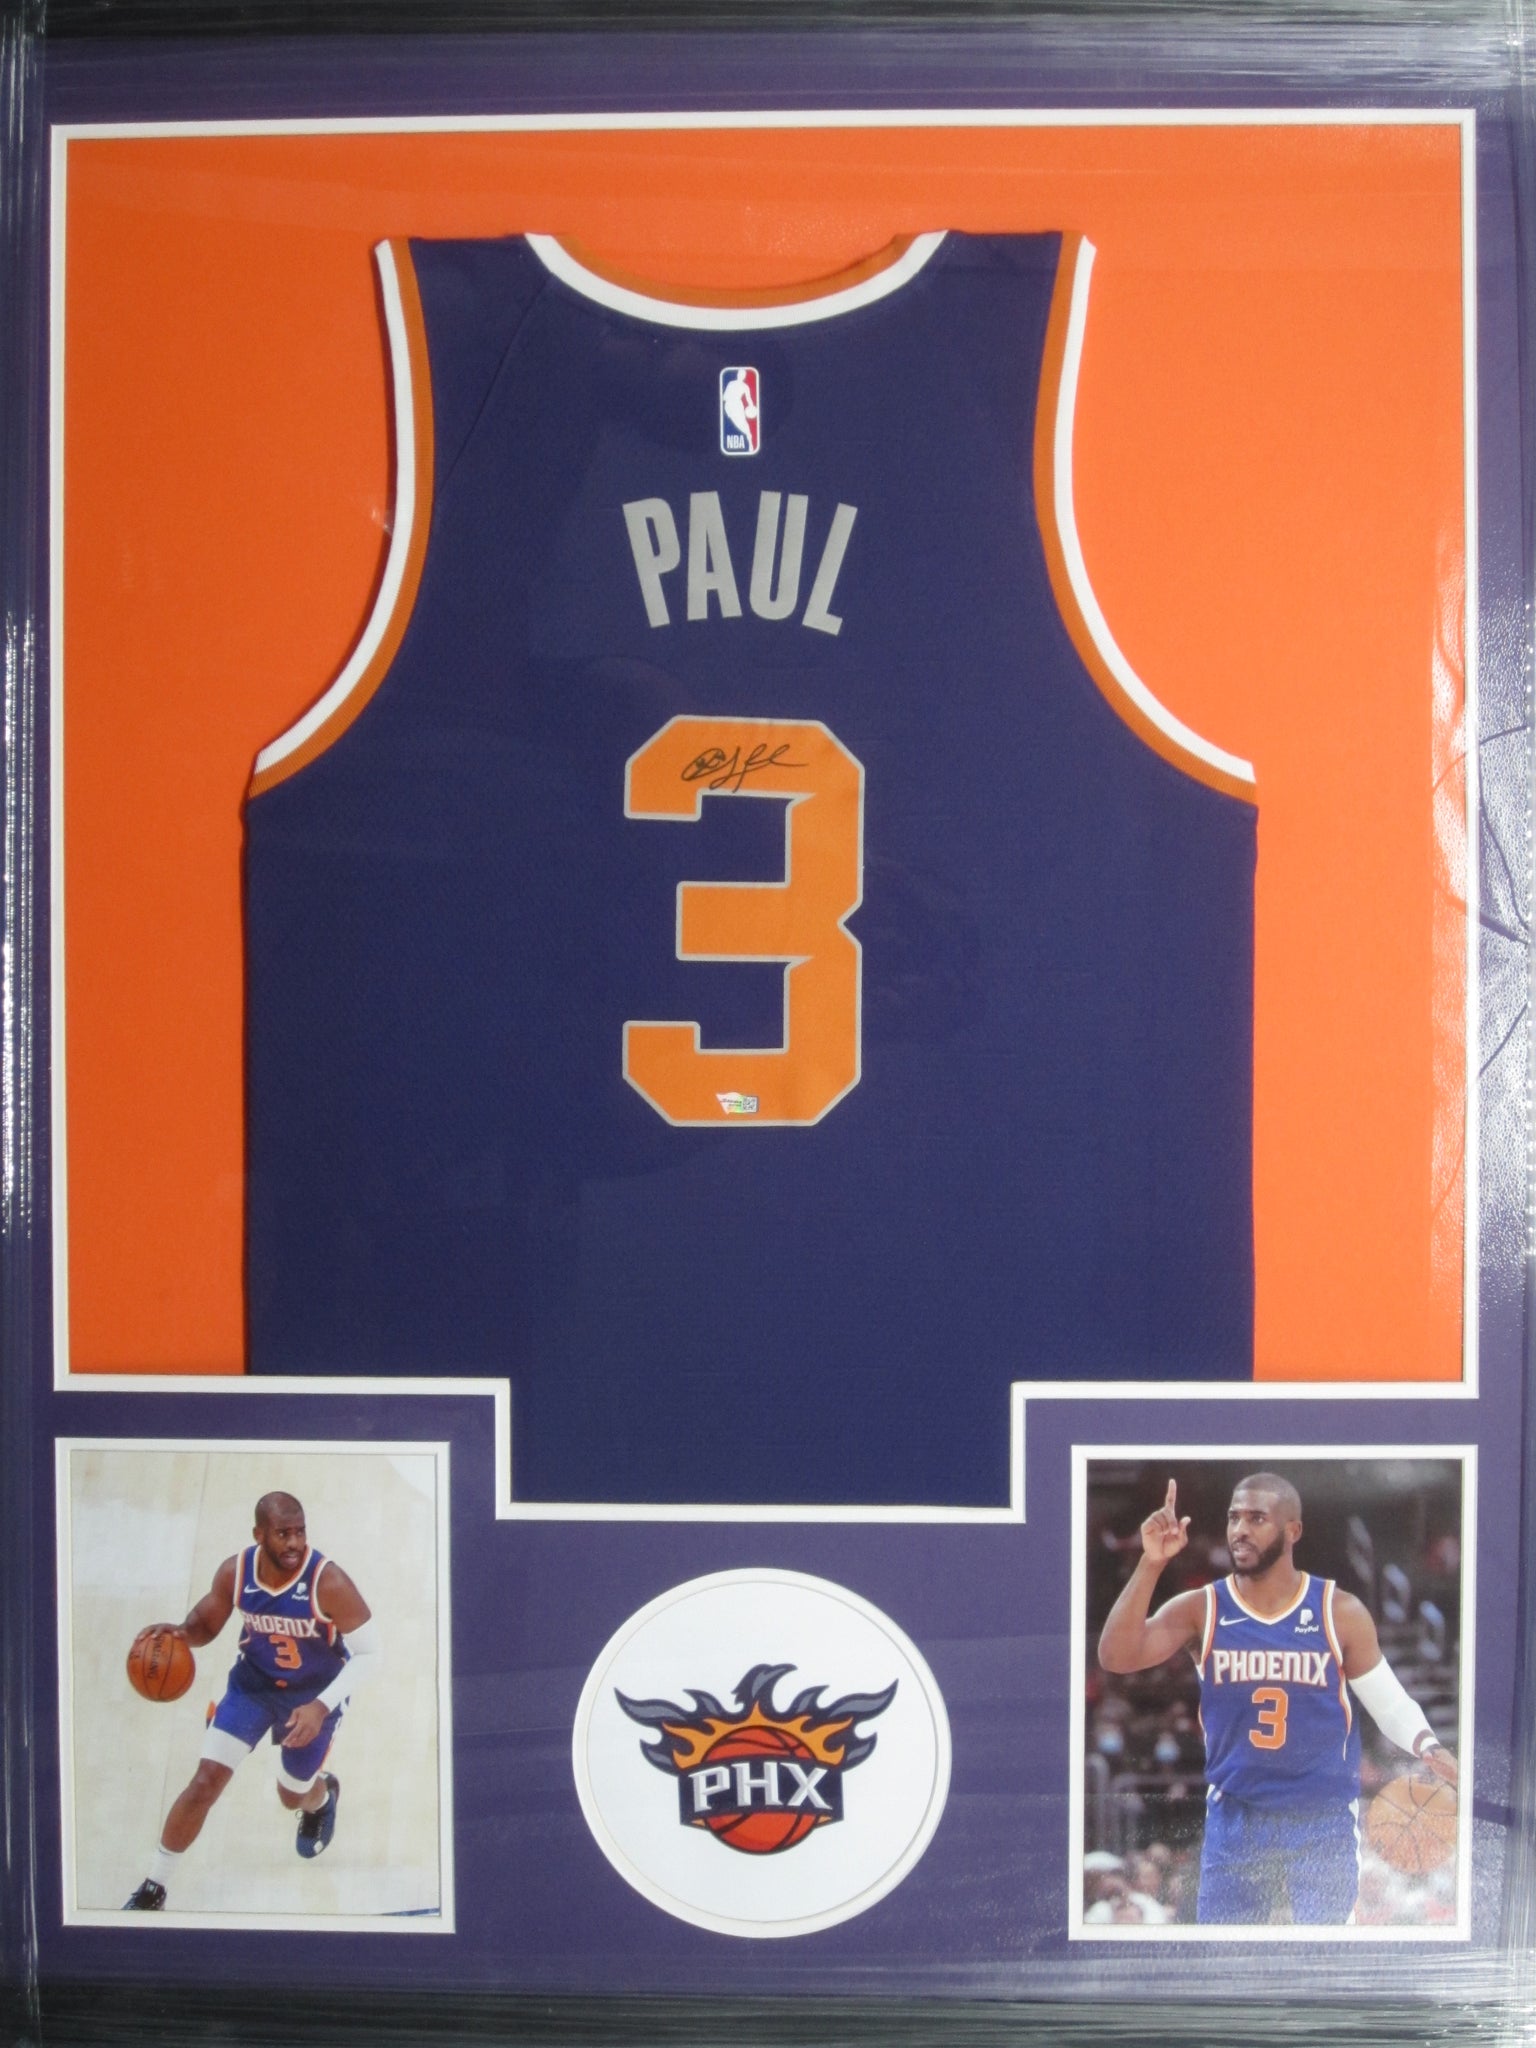 Chris Paul Signed Suns 33x42 Custom Framed Jersey Display with LED